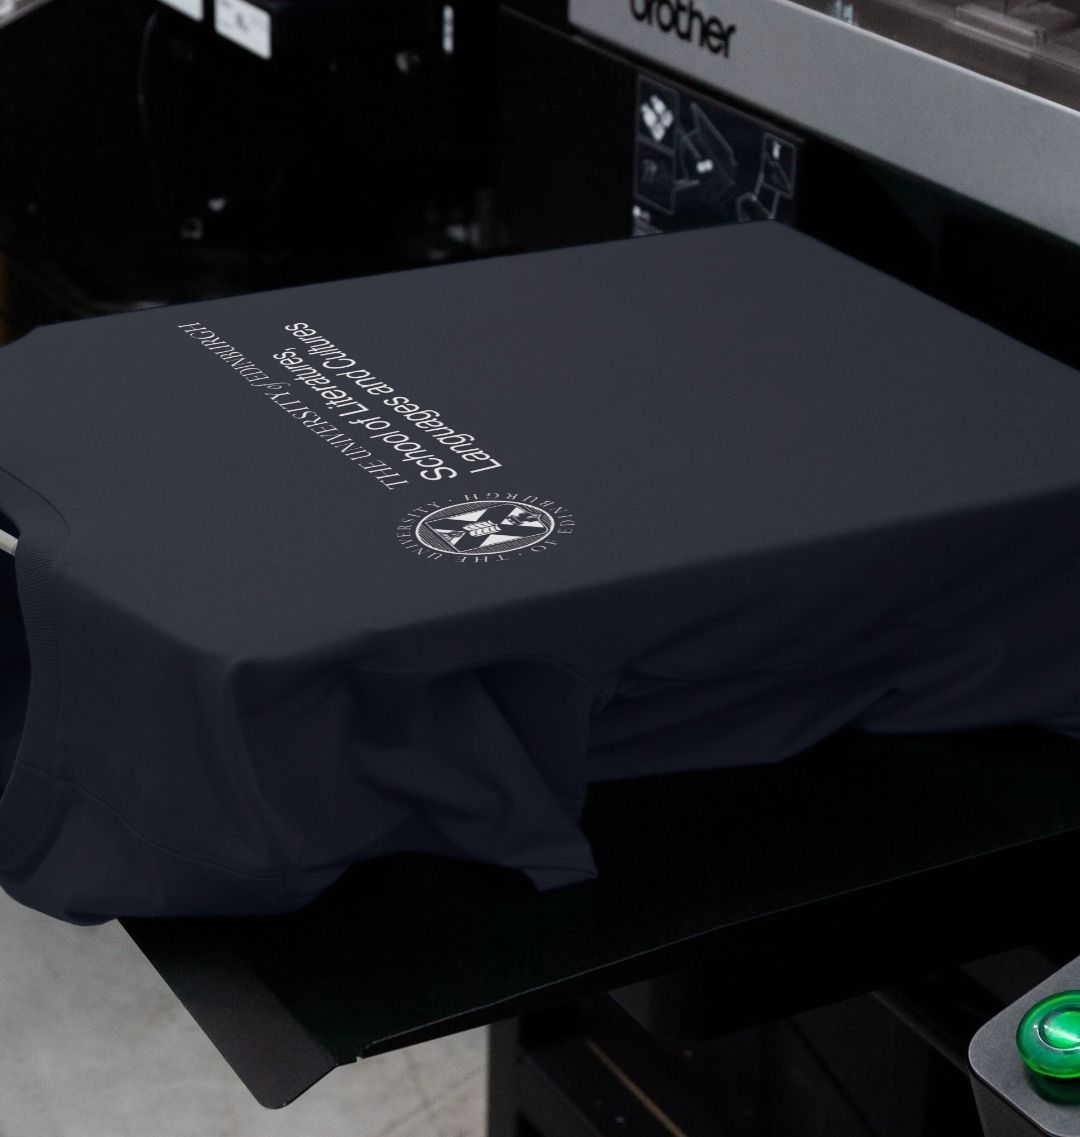 Our School of Literatures, Languages and Cultures T Shirt being printed by our print on demand partner, teemill.